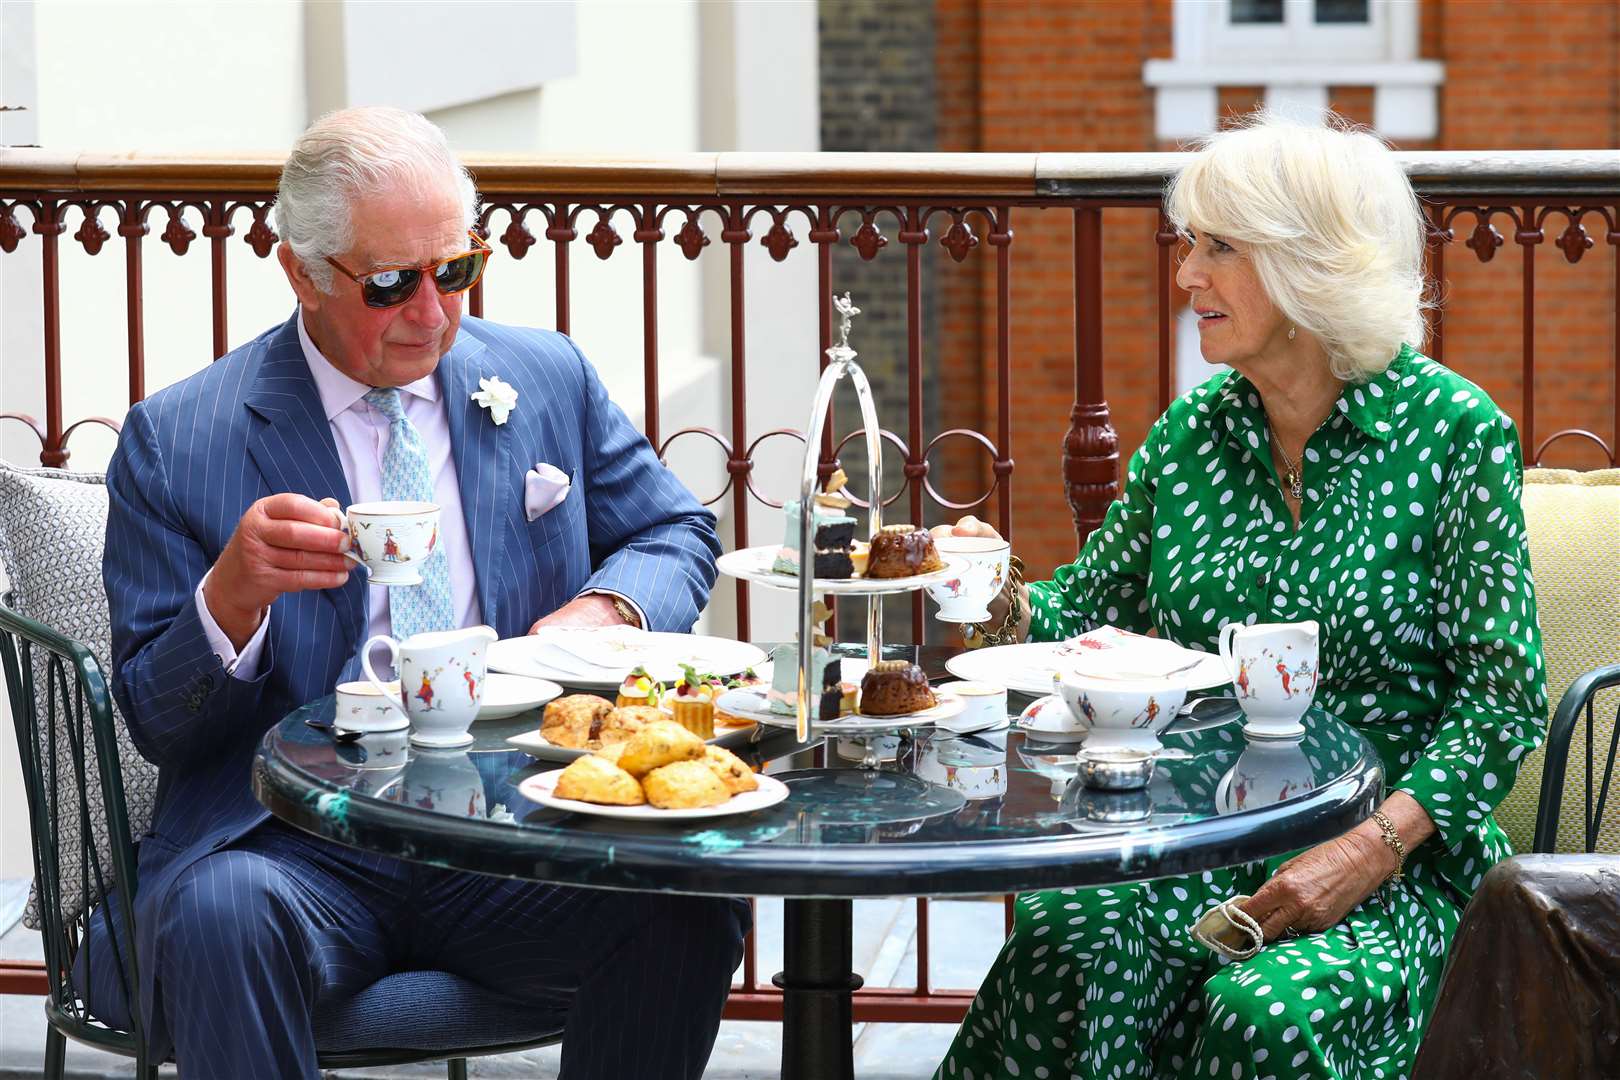 The Prince of Wales and Duchess of Cornwall have tea on the terrace (Tim Whitby/PA)